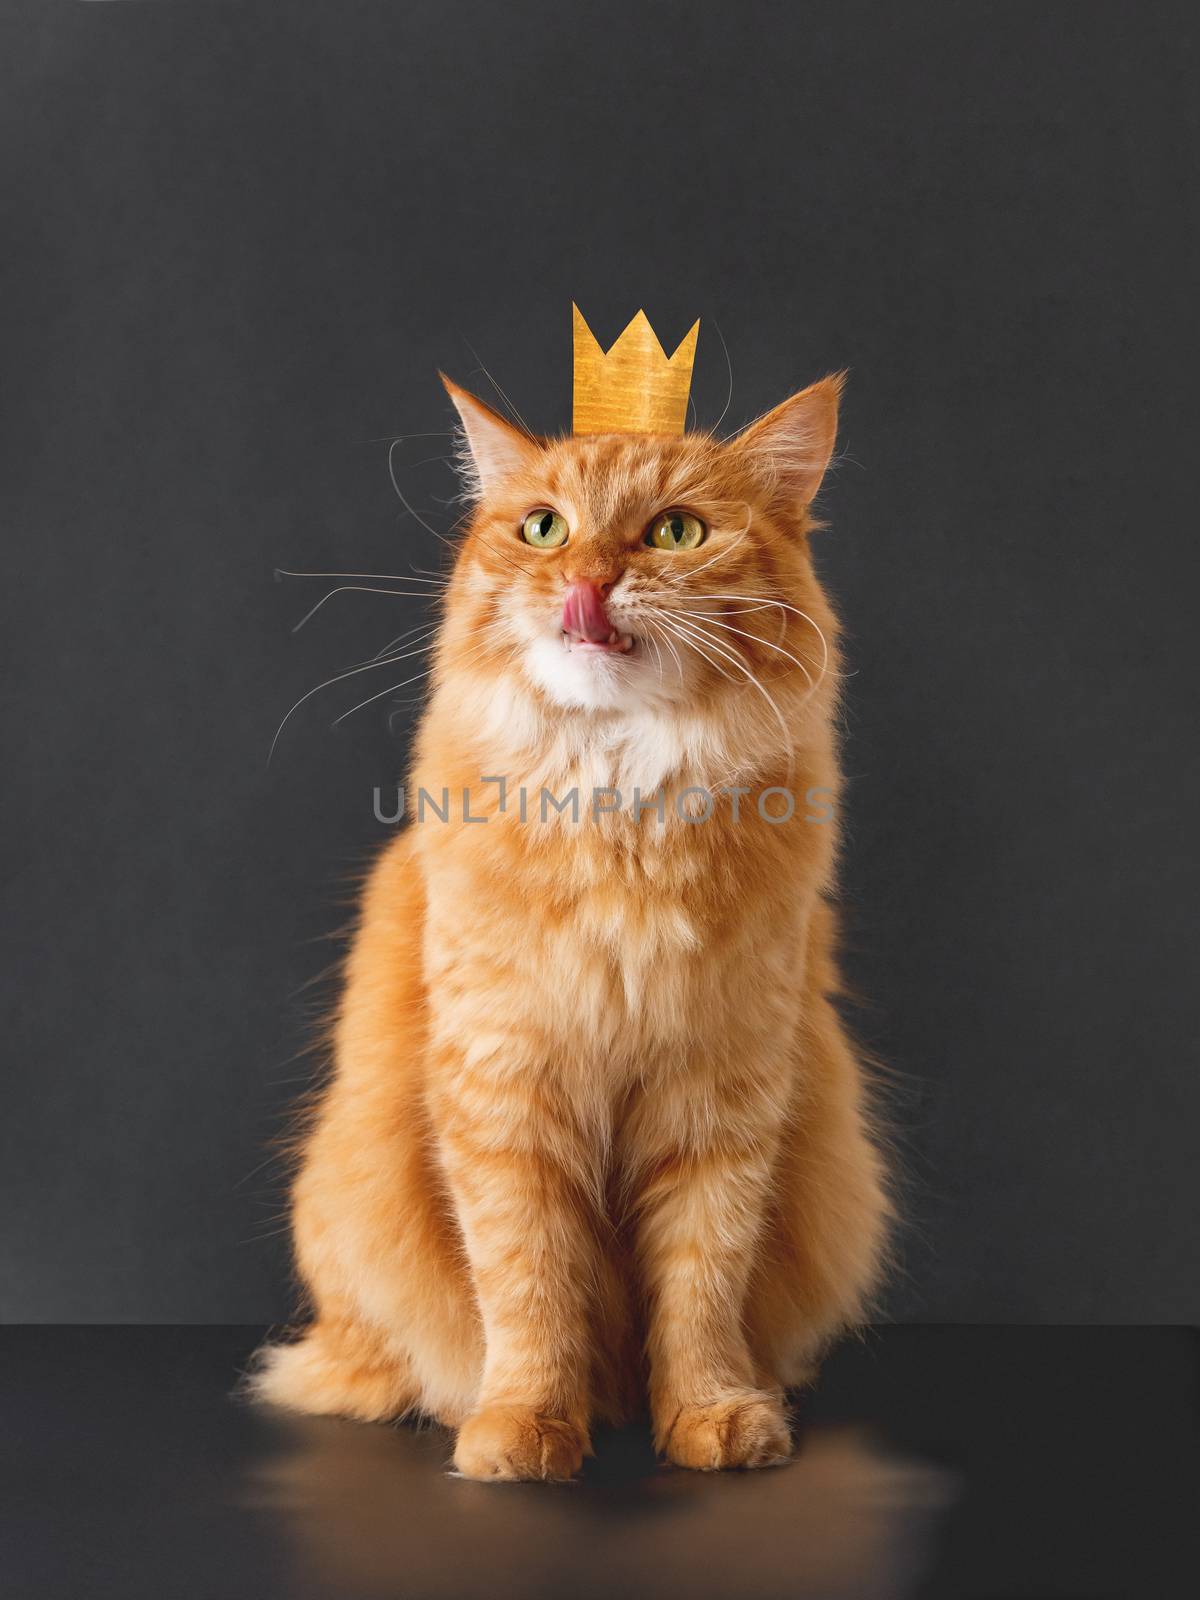 Cute ginger cat with awesome expression on face and golden crown on head posing like lion on black background. Fluffy pet licks its lips.